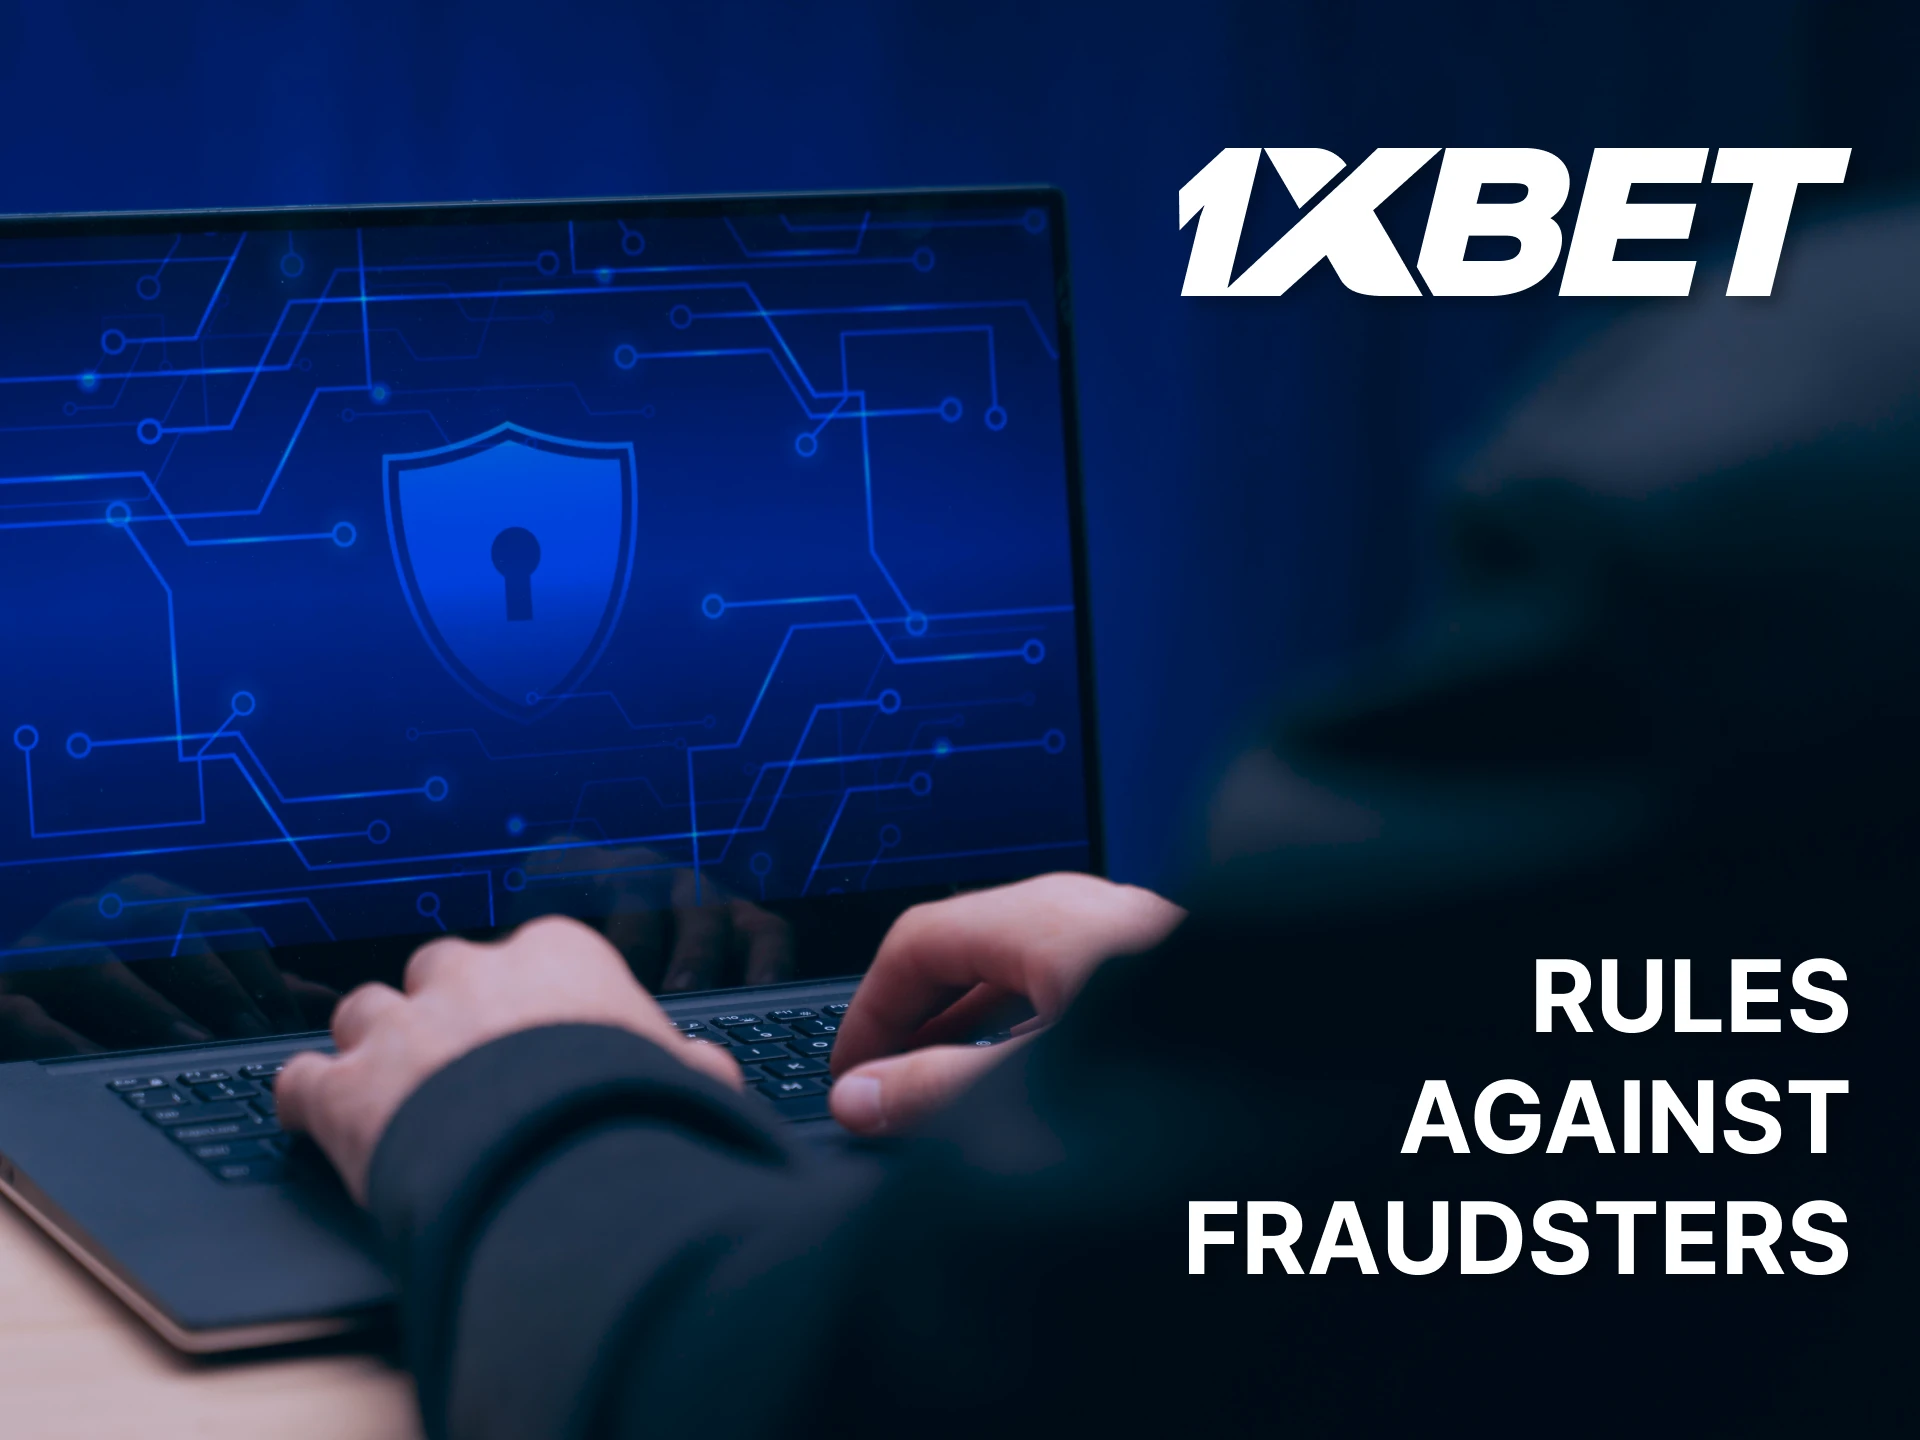 Get acquainted with the rules of 1xBet to protect yourself from fraudsters.